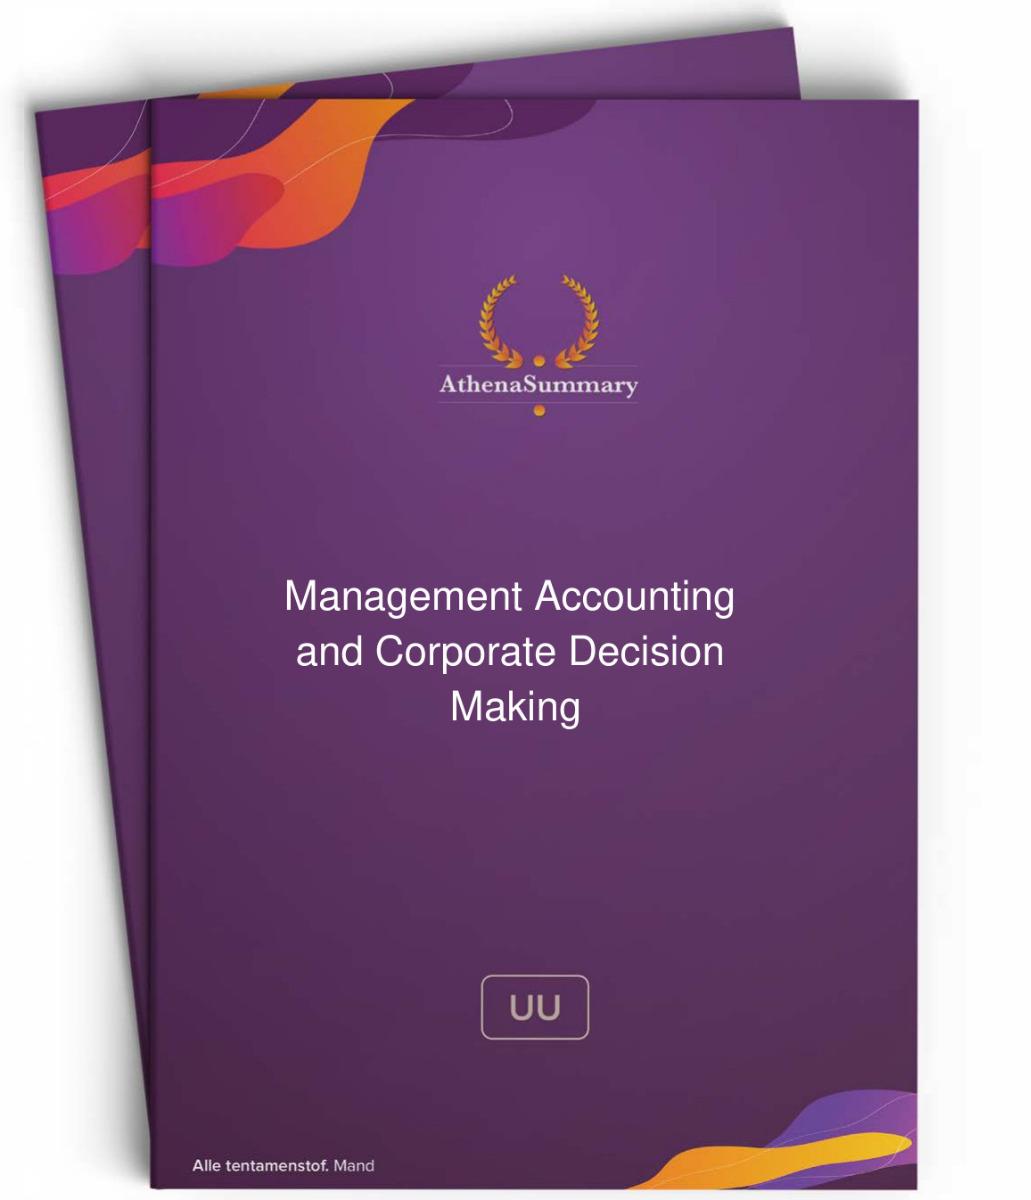 Literature Summary: Management Accounting and Corporate Decision Making